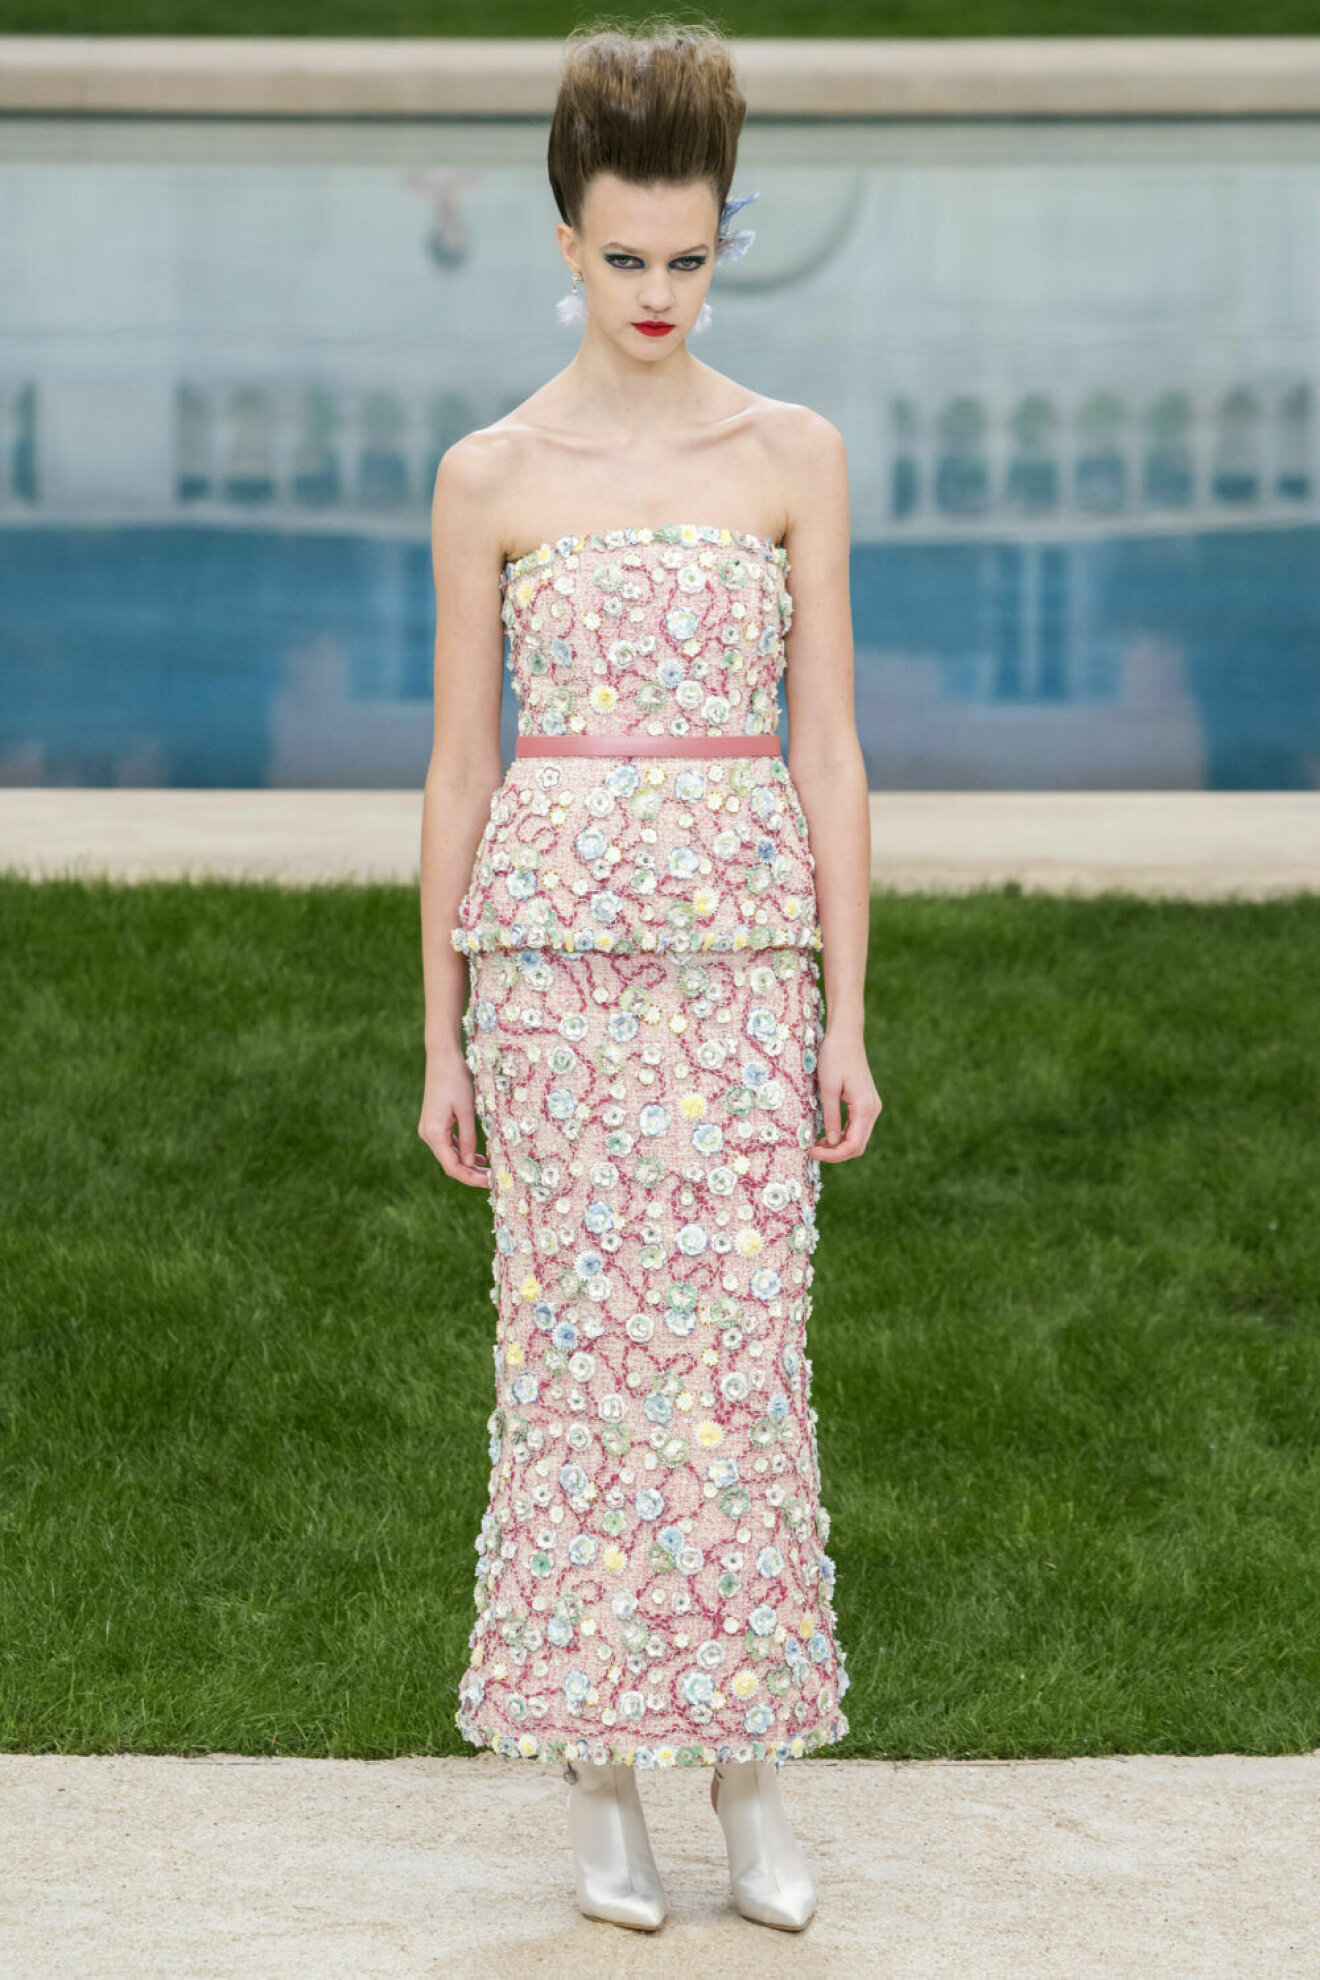 Chanel Haute Couture Paris, broderad blomster i rosa.